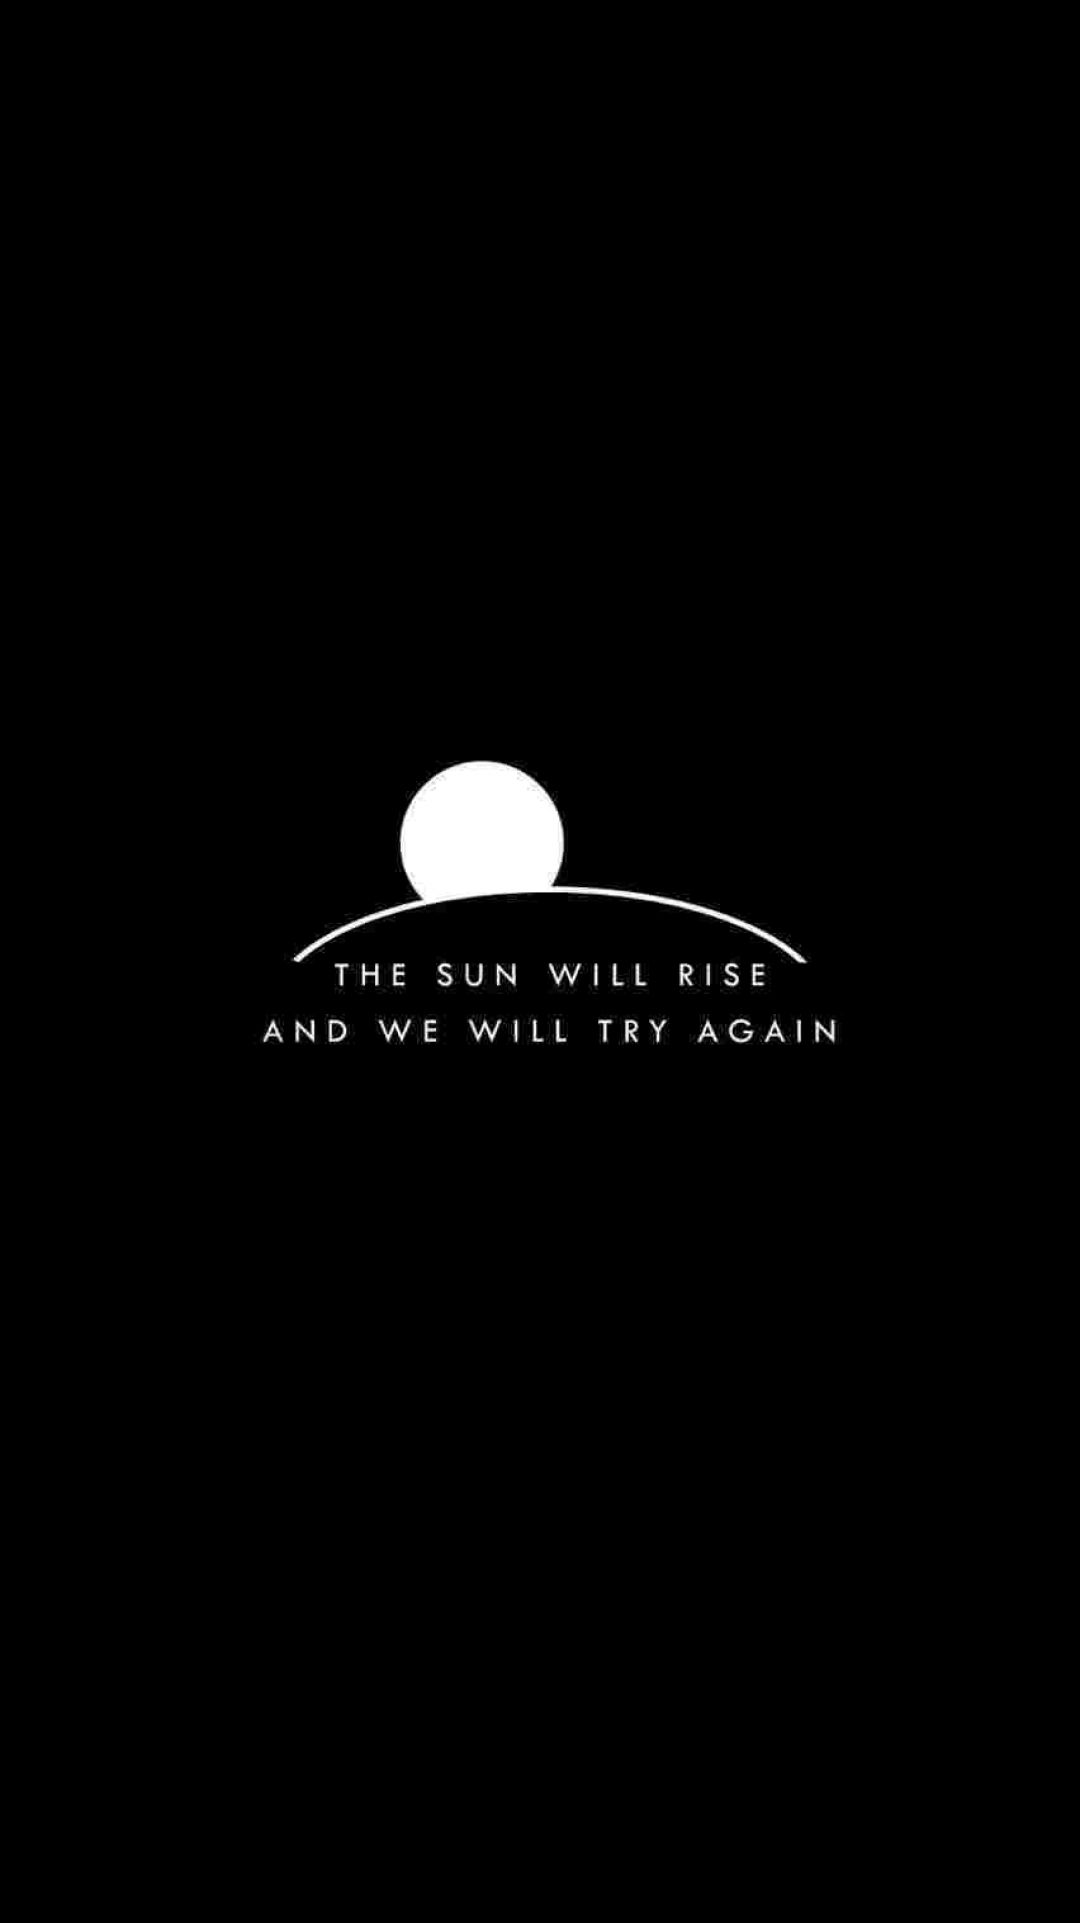 The sun will rise and we shall overcome - Sad quotes